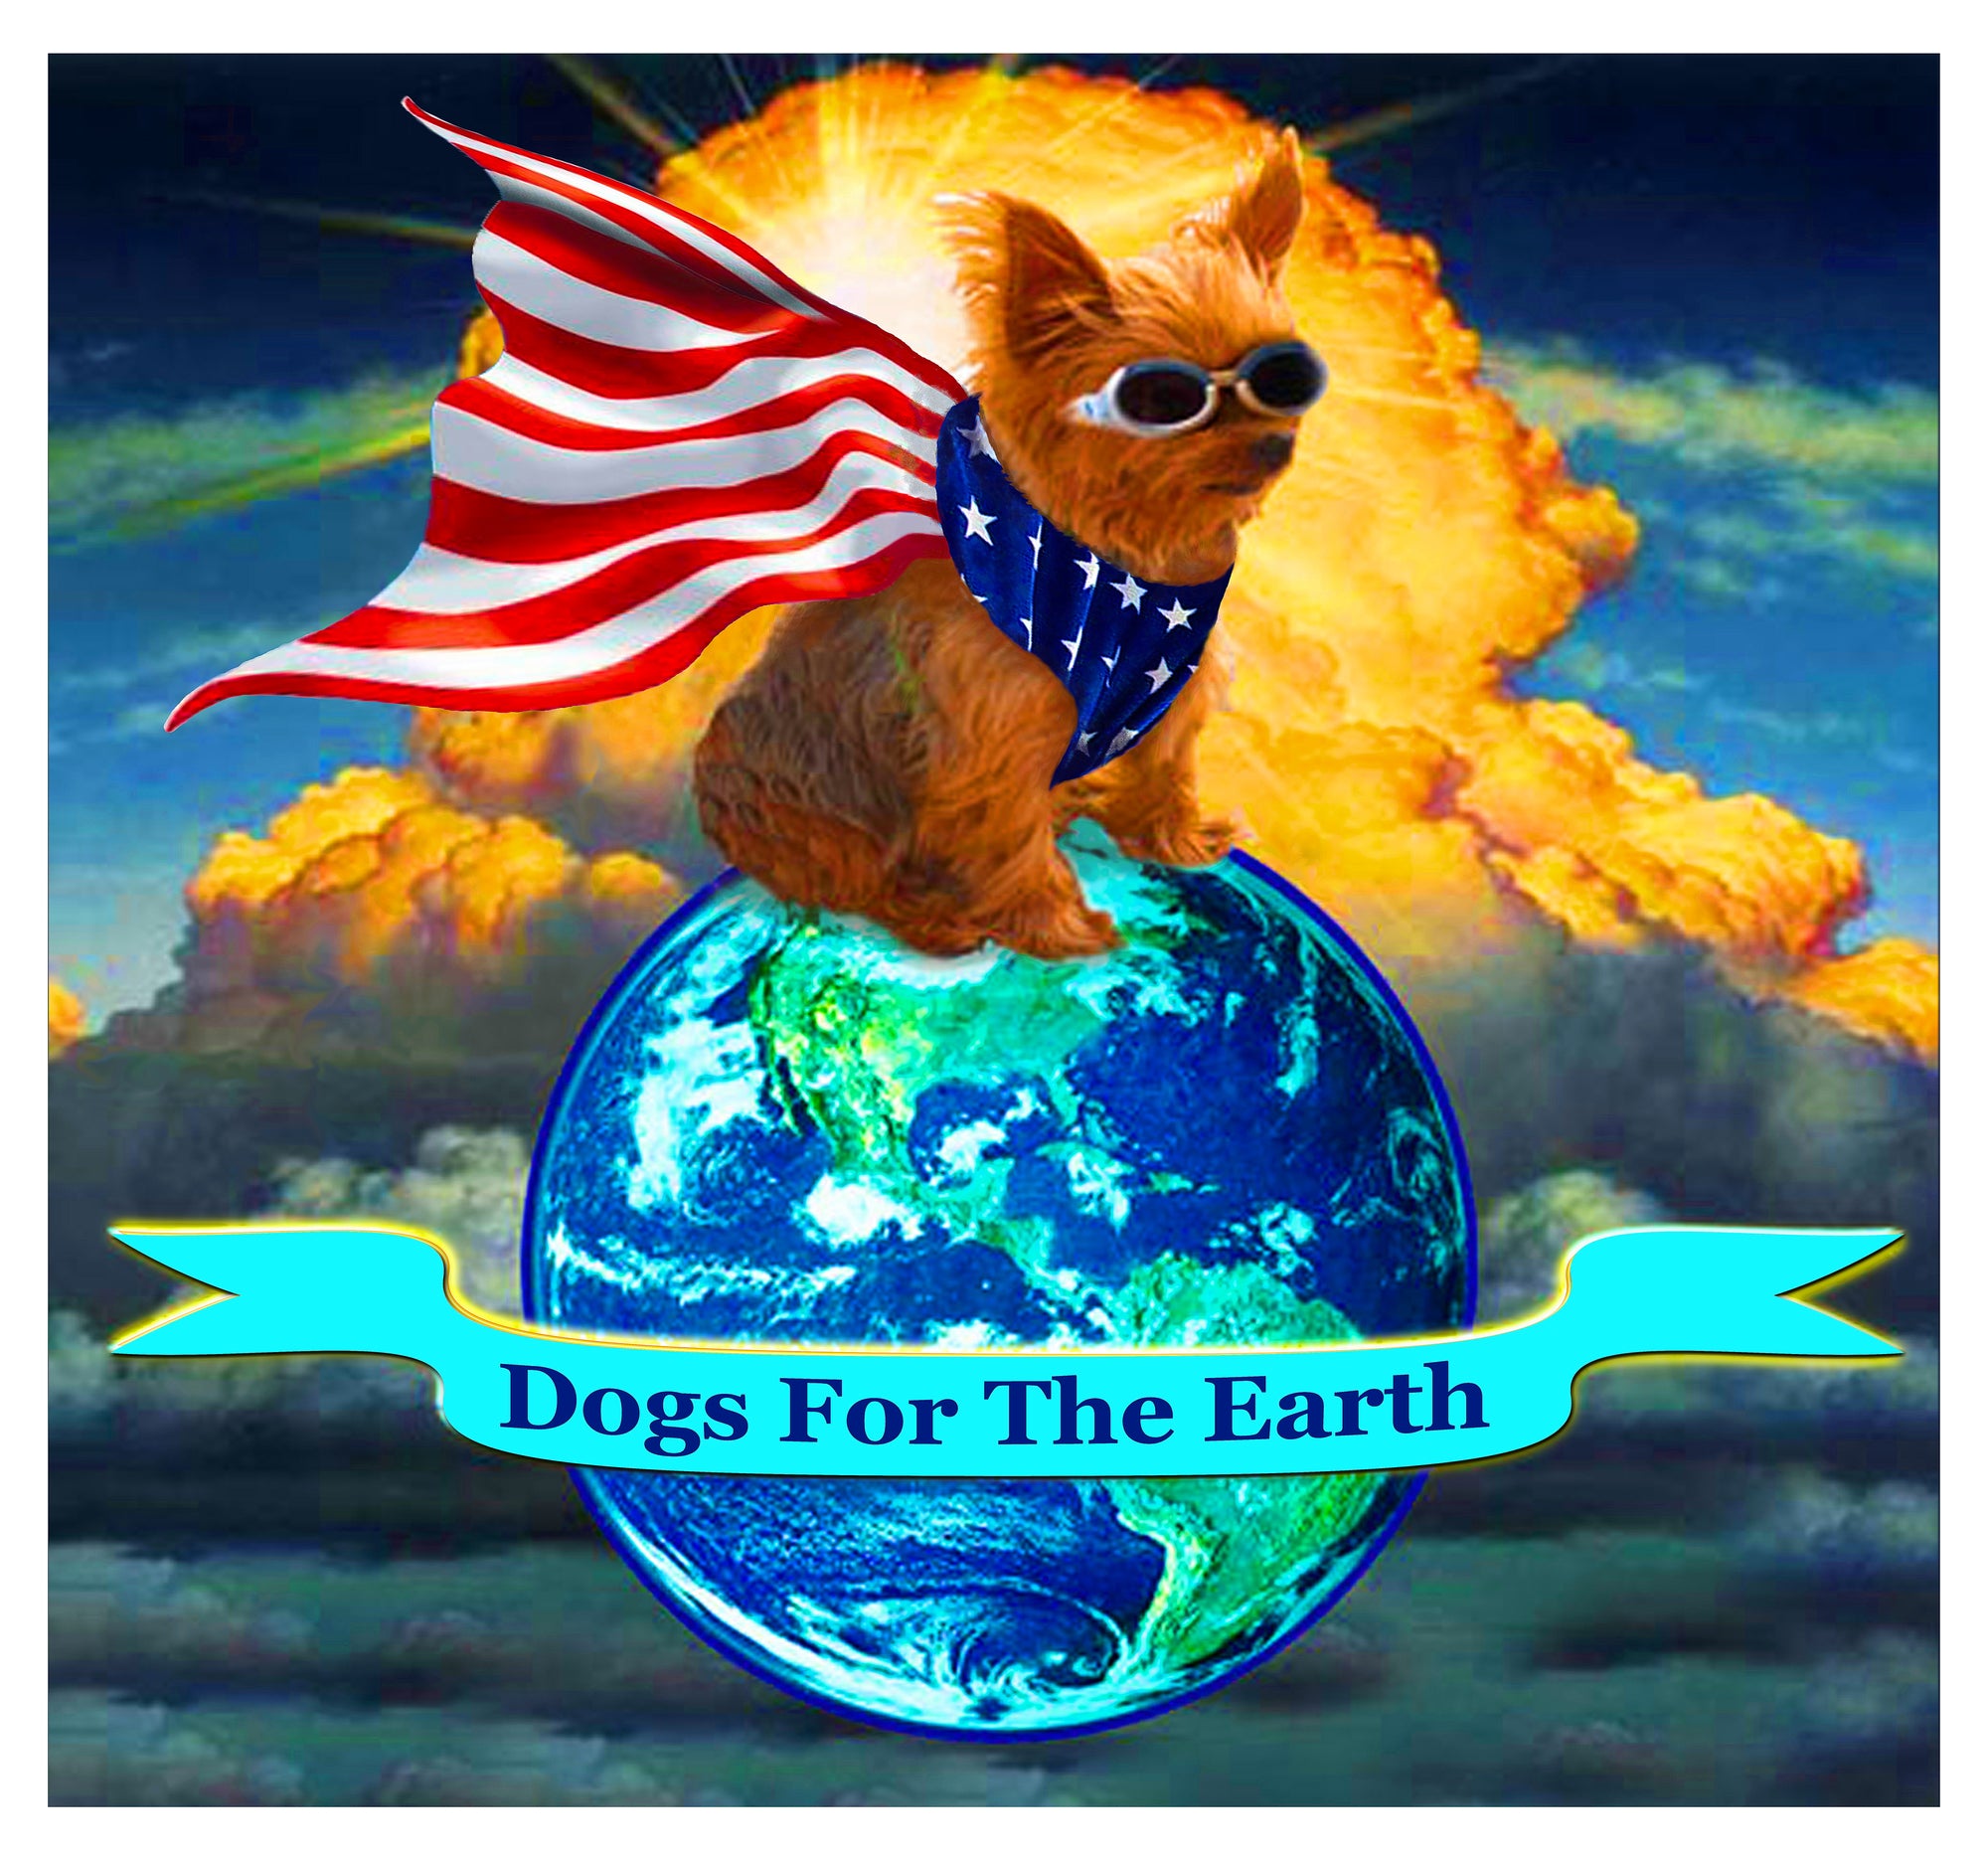 Dogs for the Earth logo.